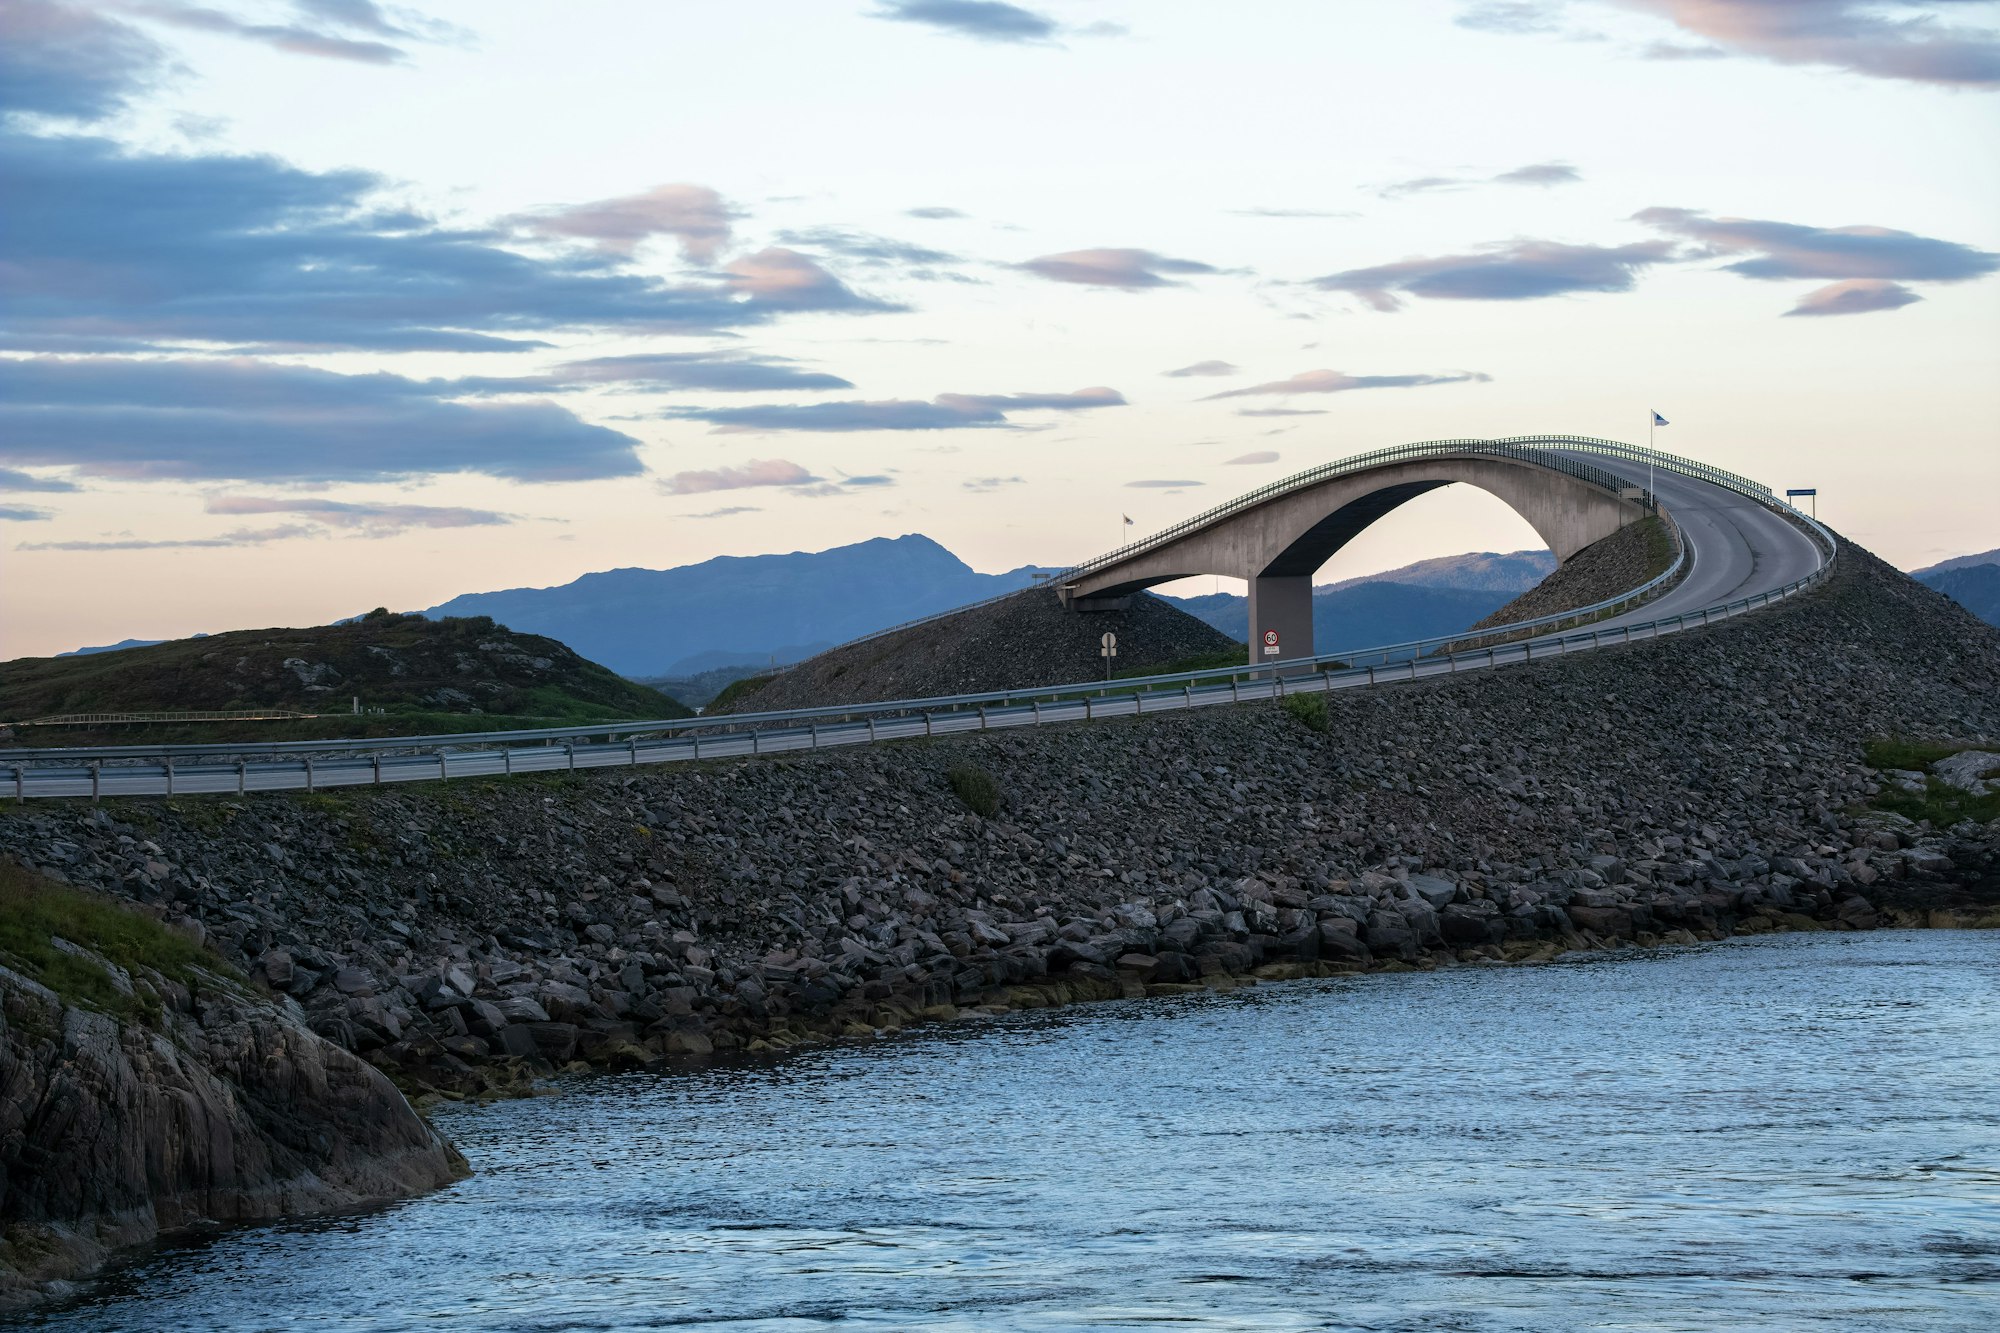 Mesmerizing Storseisundet Bridge that connect the Romsdal county to Romsdal peninsula in Norway